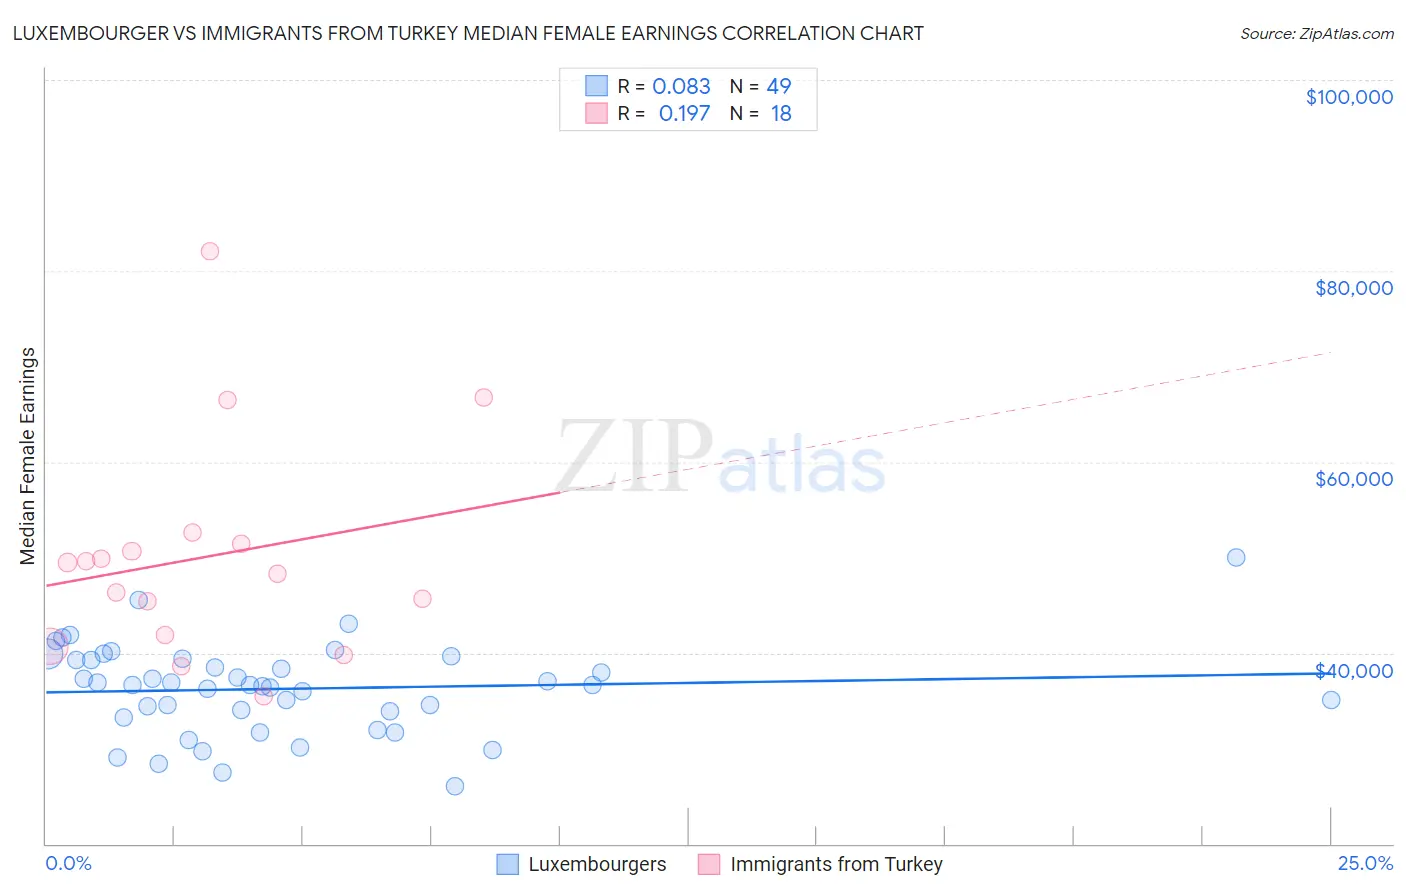 Luxembourger vs Immigrants from Turkey Median Female Earnings